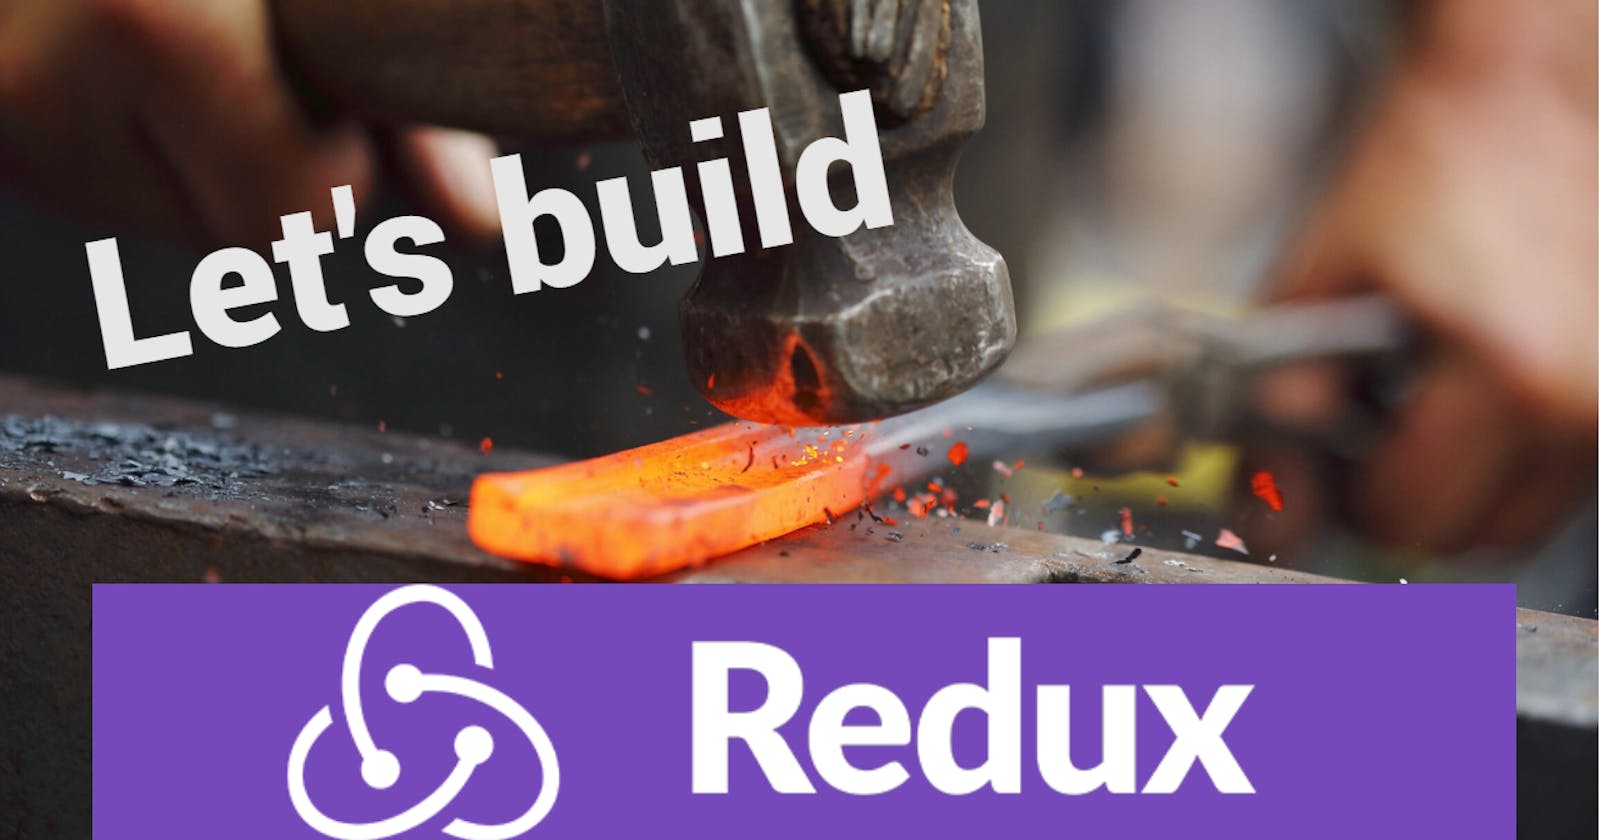 How Redux works? Let's build it from scratch